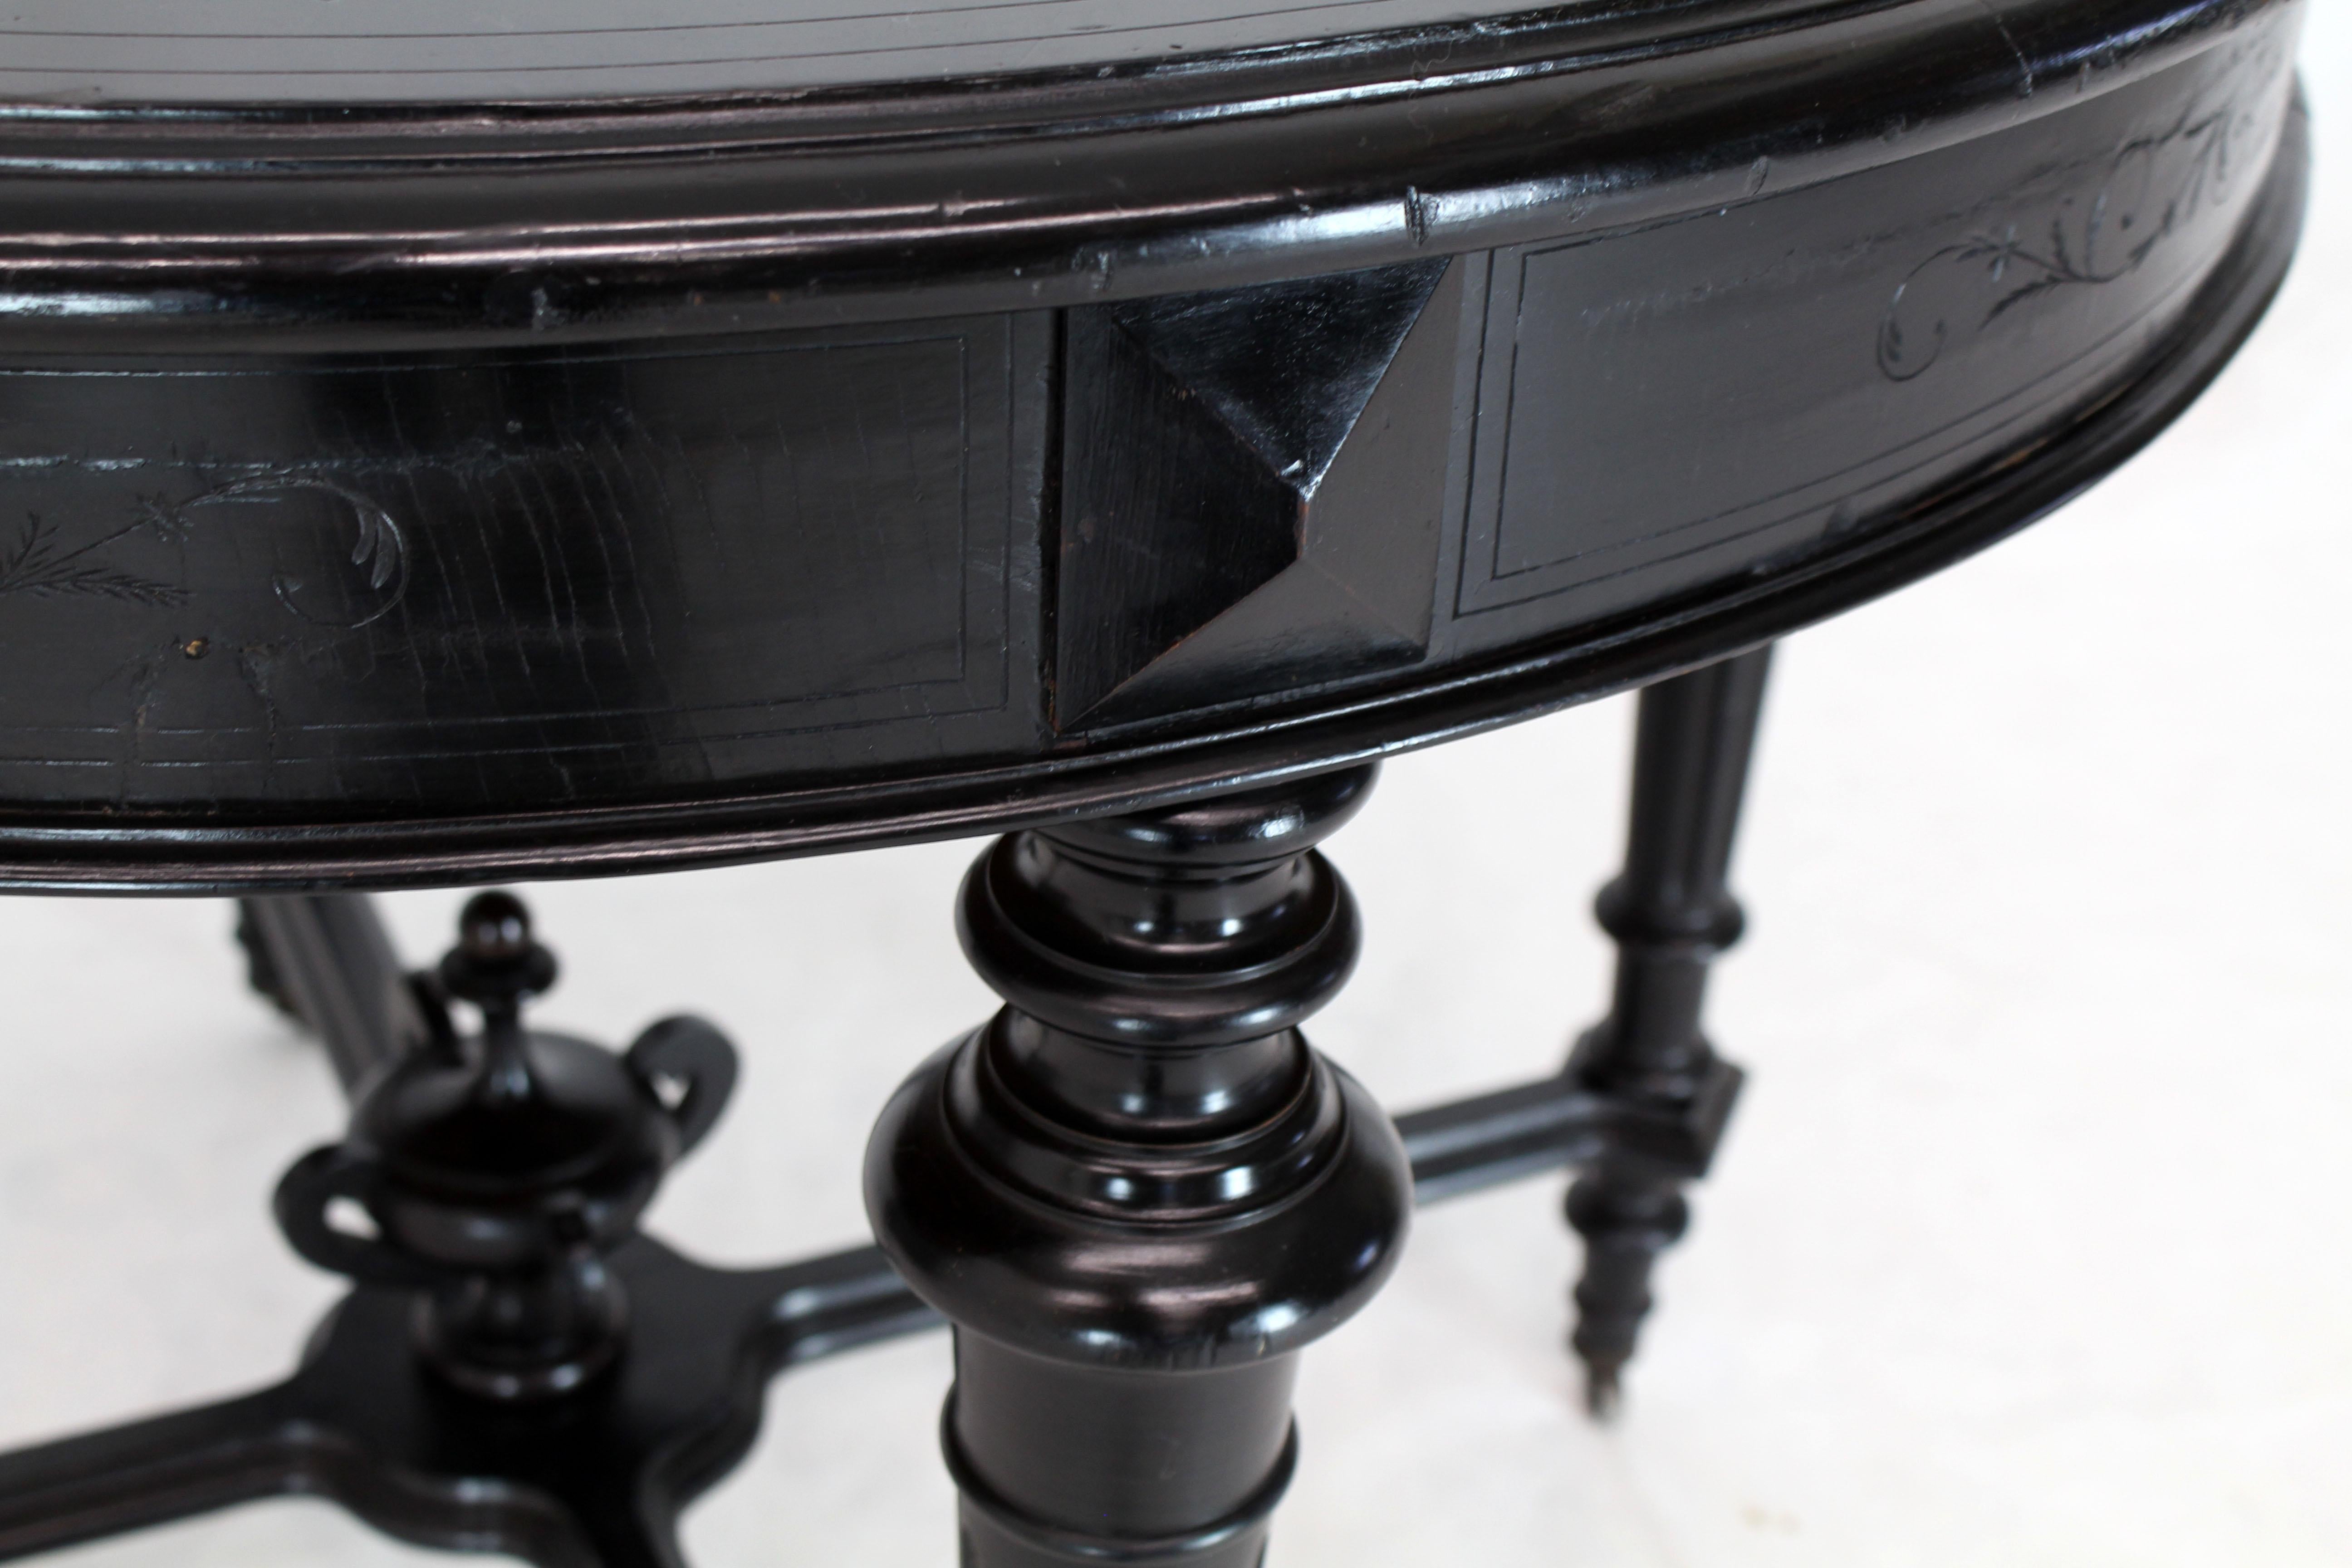 Walnut Antique Ebonised Round Centre Game Card Table Victorian East Lake 1880s